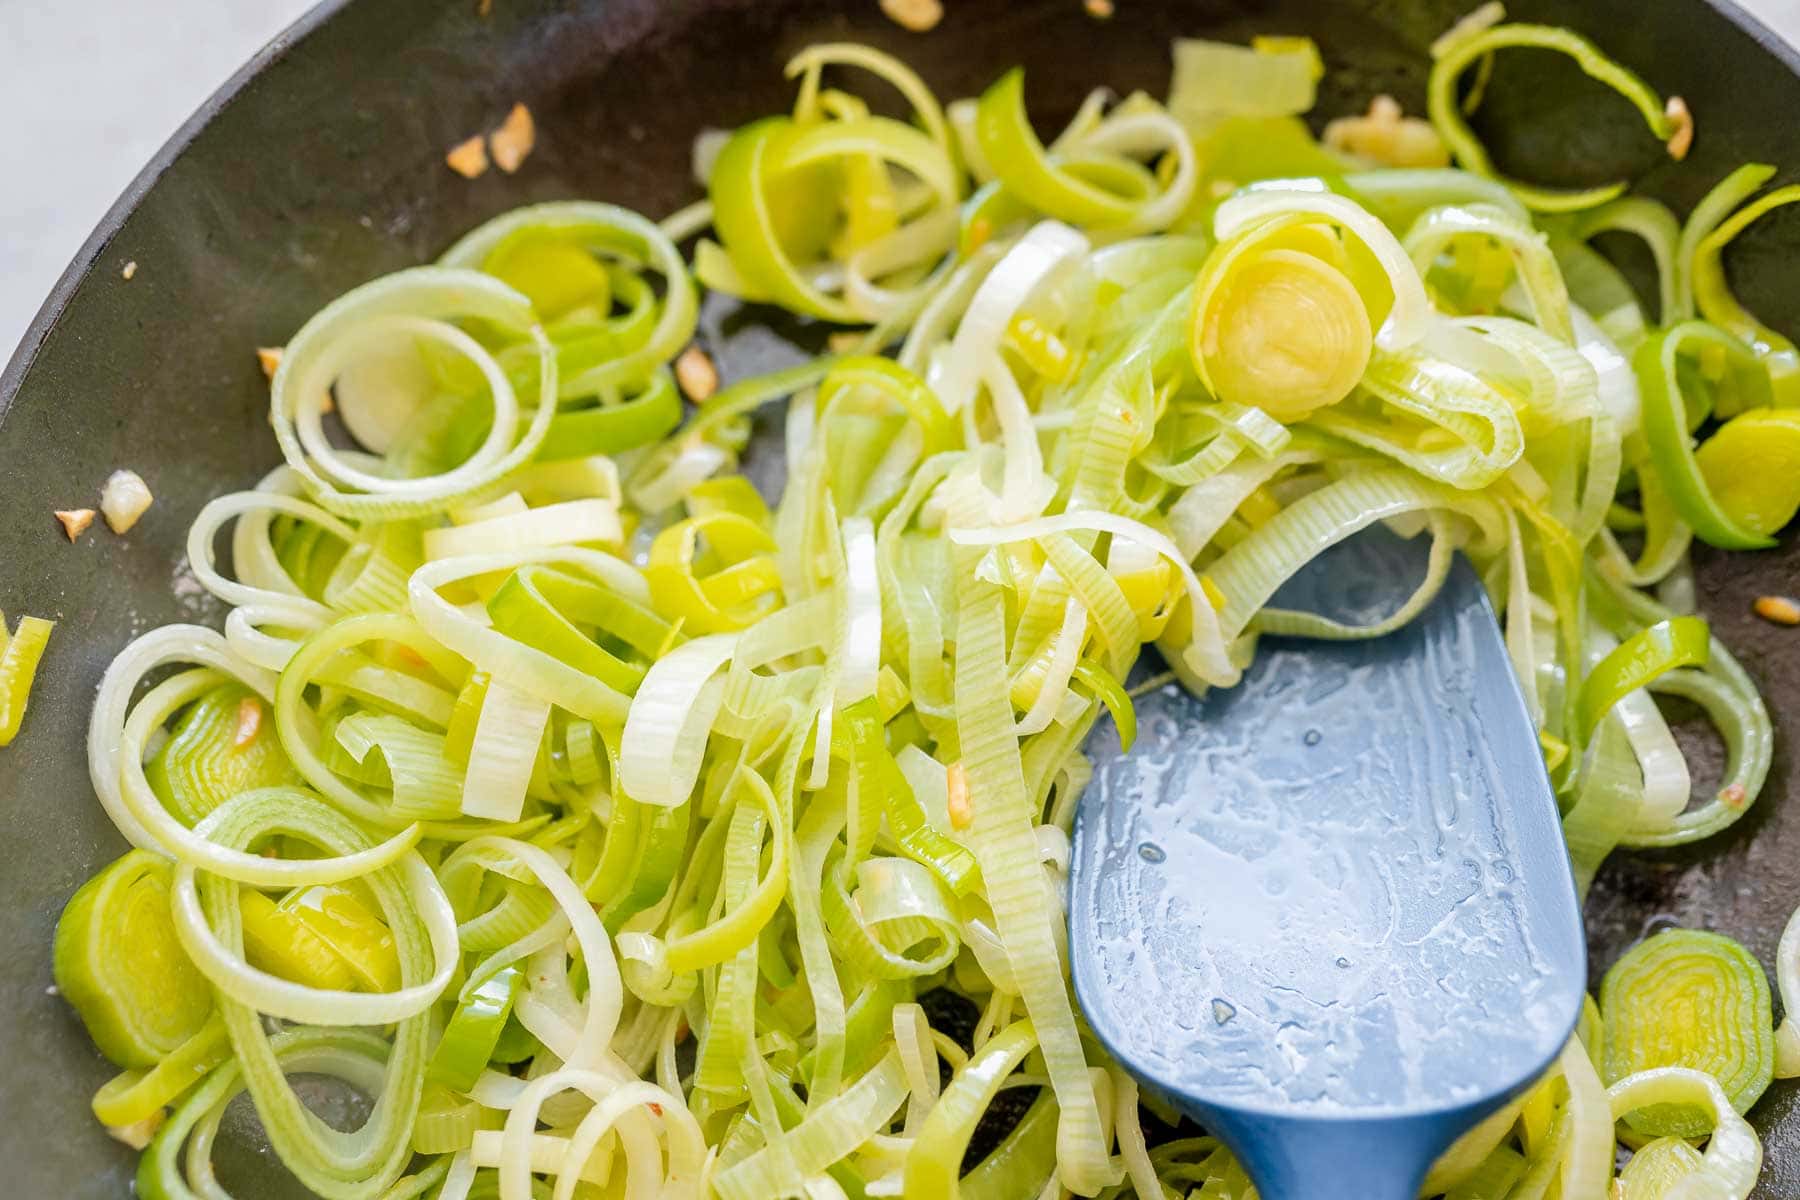 A blue spatula rests in a skillet of sliced leeks.